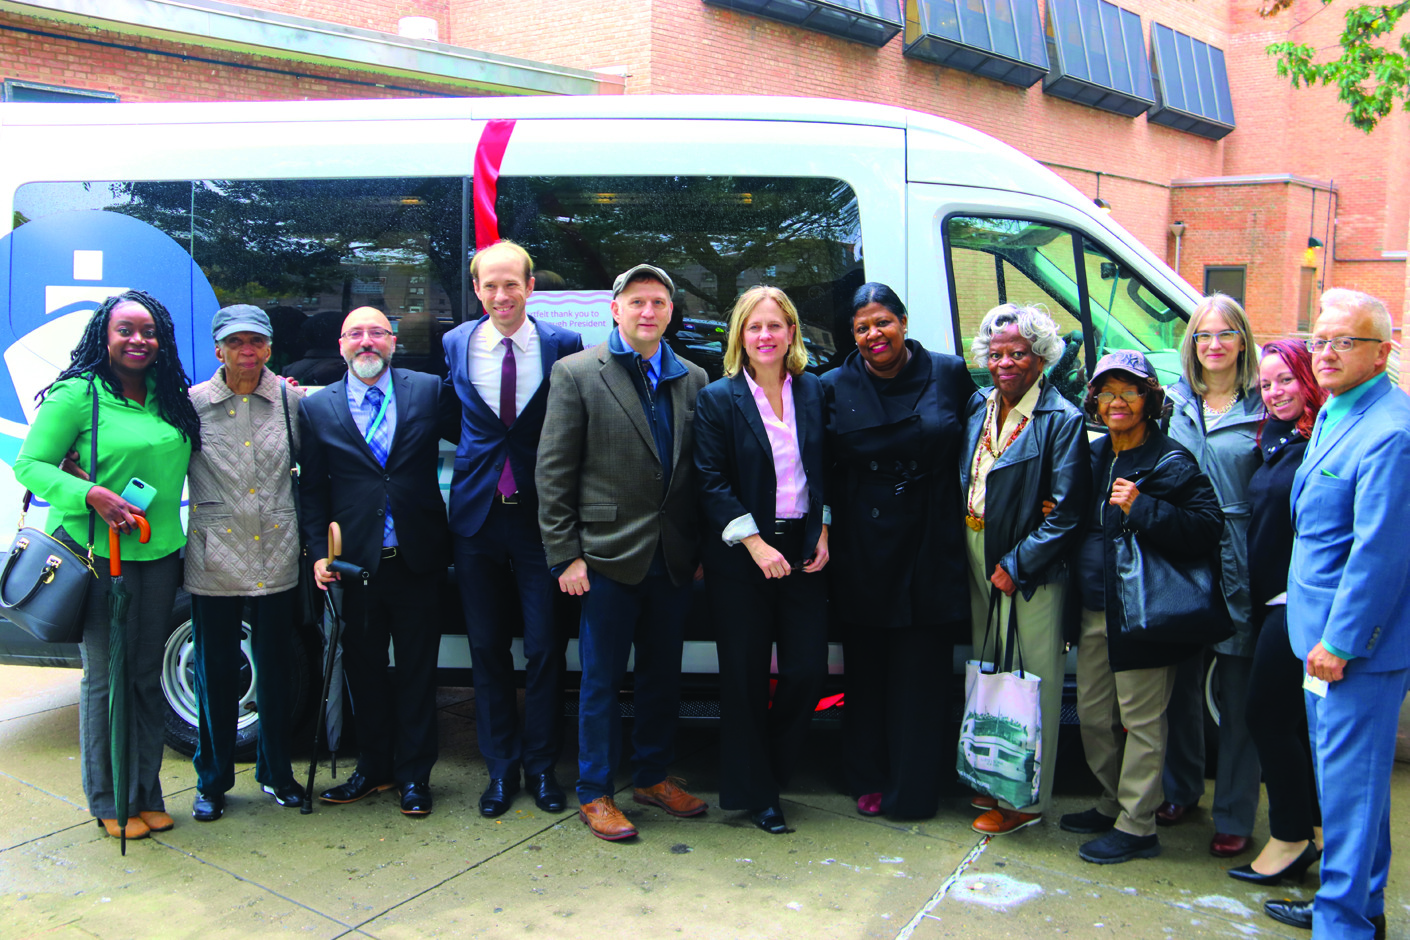 Then Queensboro president, Melinda Katz, who supported funding to purchase vehicles for TFH’s Good Health Shuttle fleet, gathers with Floating Hospital staff and members of her team in front of a new minibus at a dedication ceremony in October 2018.